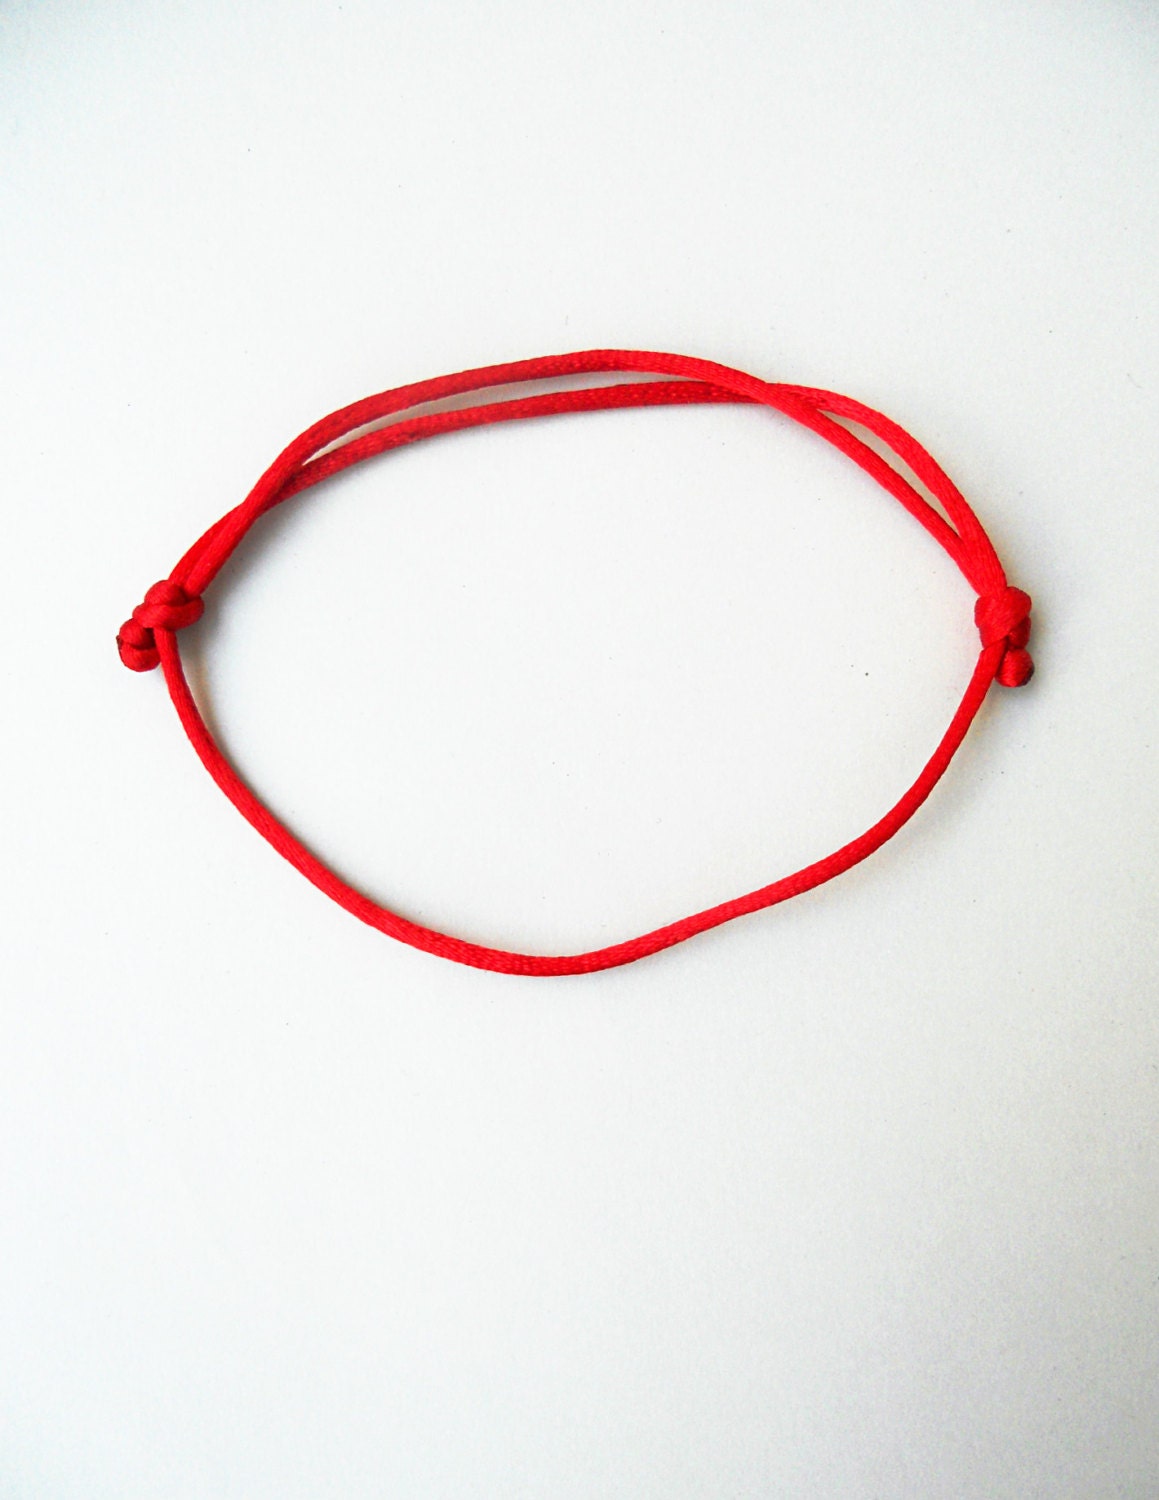 Red anklet Red string of fate Satin rattail cord Buddhist